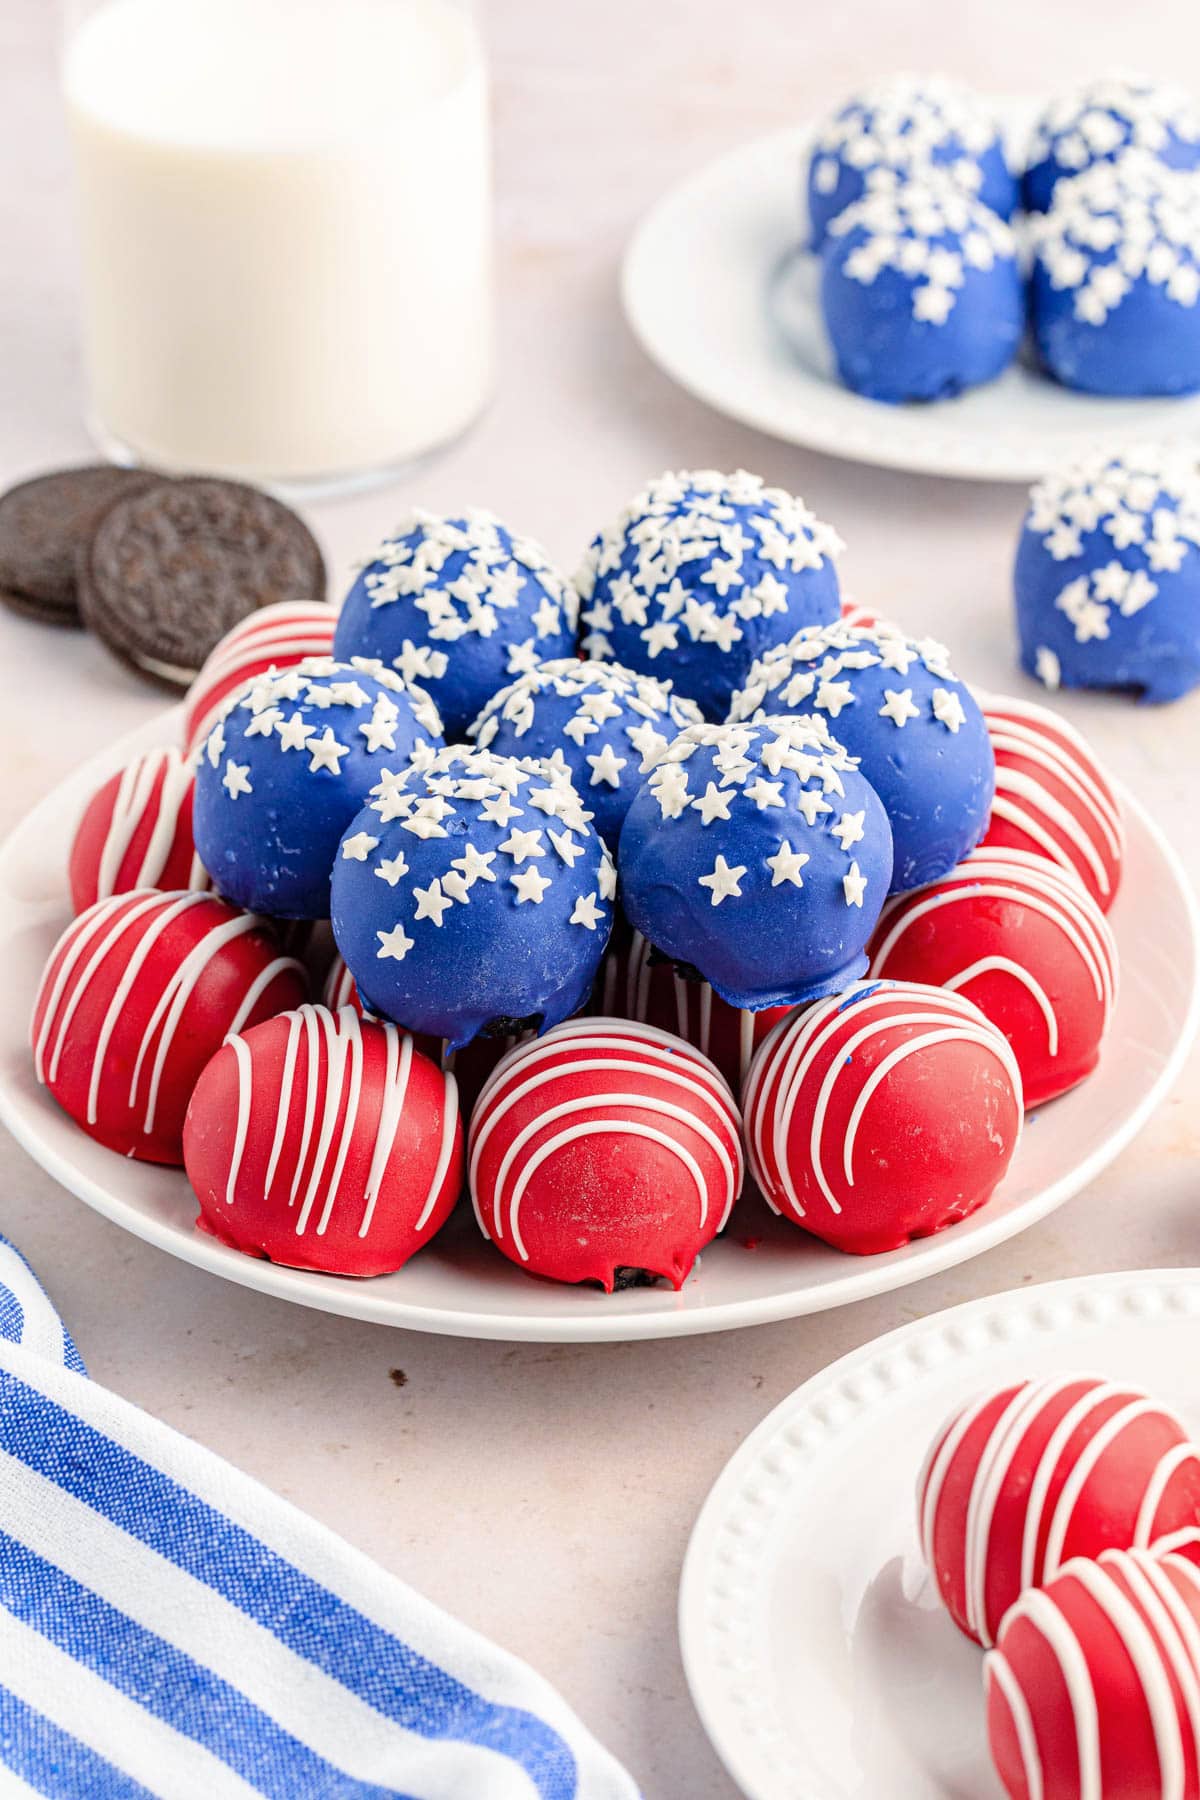 Red and blue cake balls piled on a white plate